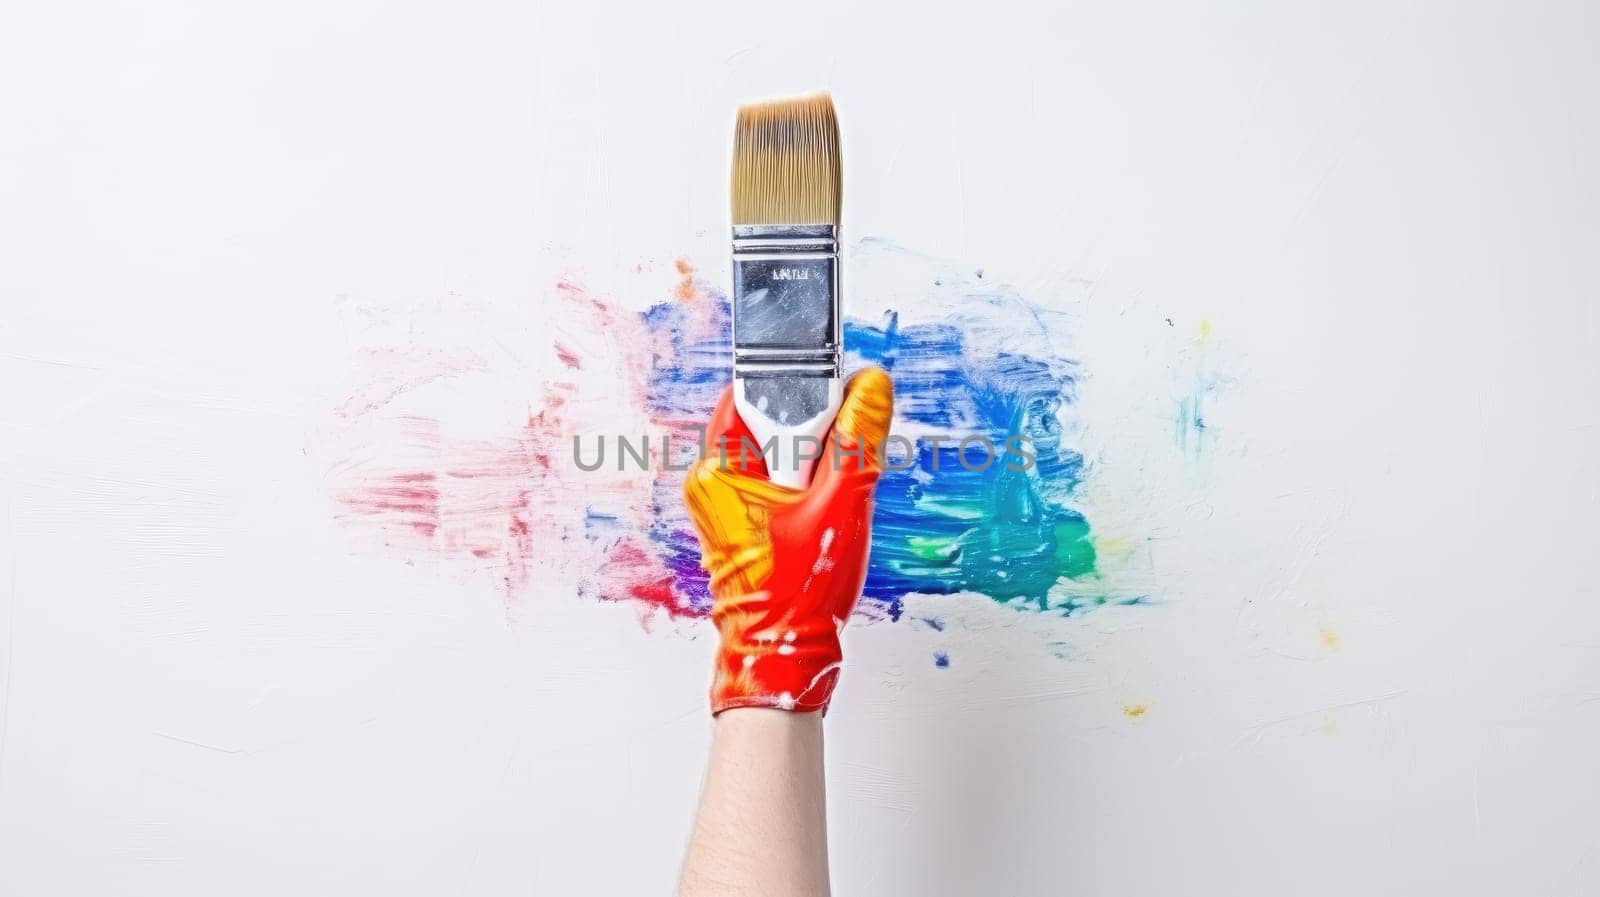 Colorful Renovation Project. Hand Holding Paint Brush with Rainbow Paint Splash - DIY Home Improvement on White Background. by ViShark